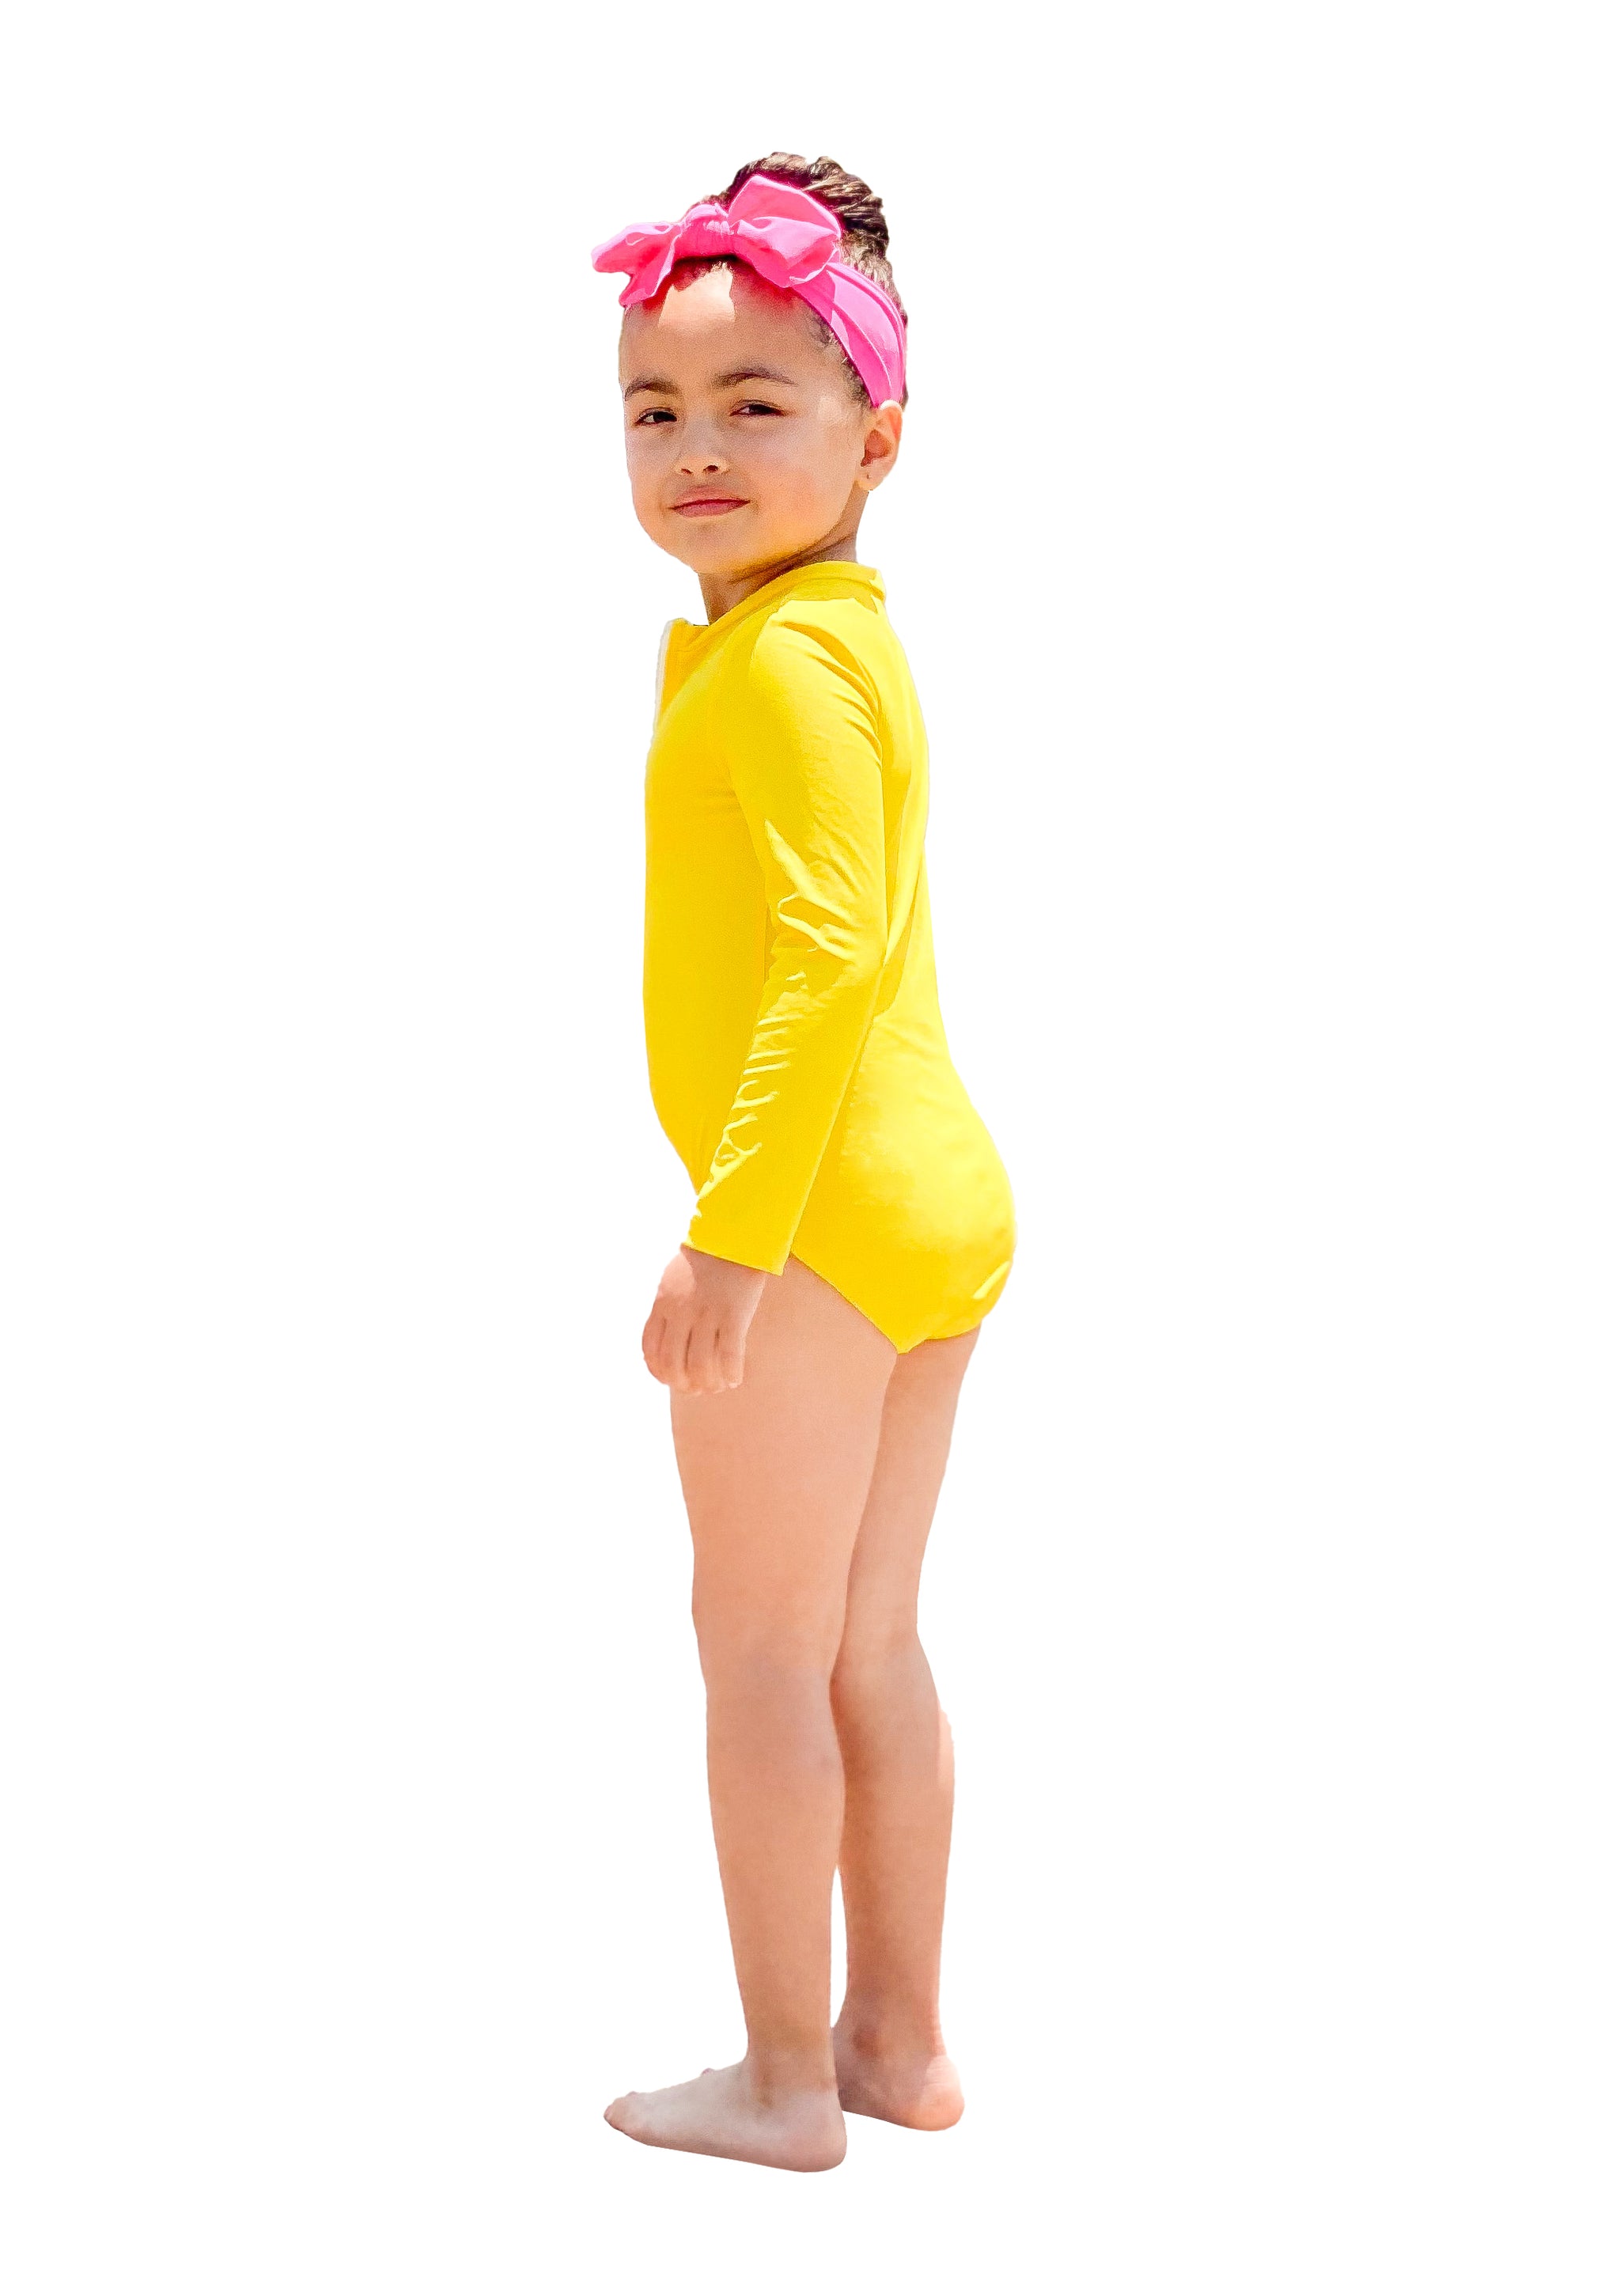 Yellow One Piece Ruffle Yellow One Piece Swimsuit For Girls, Ages 2 13  Perfect For Beach Wear And Toddler/T Teen Monokini From Sport_company,  $14.69